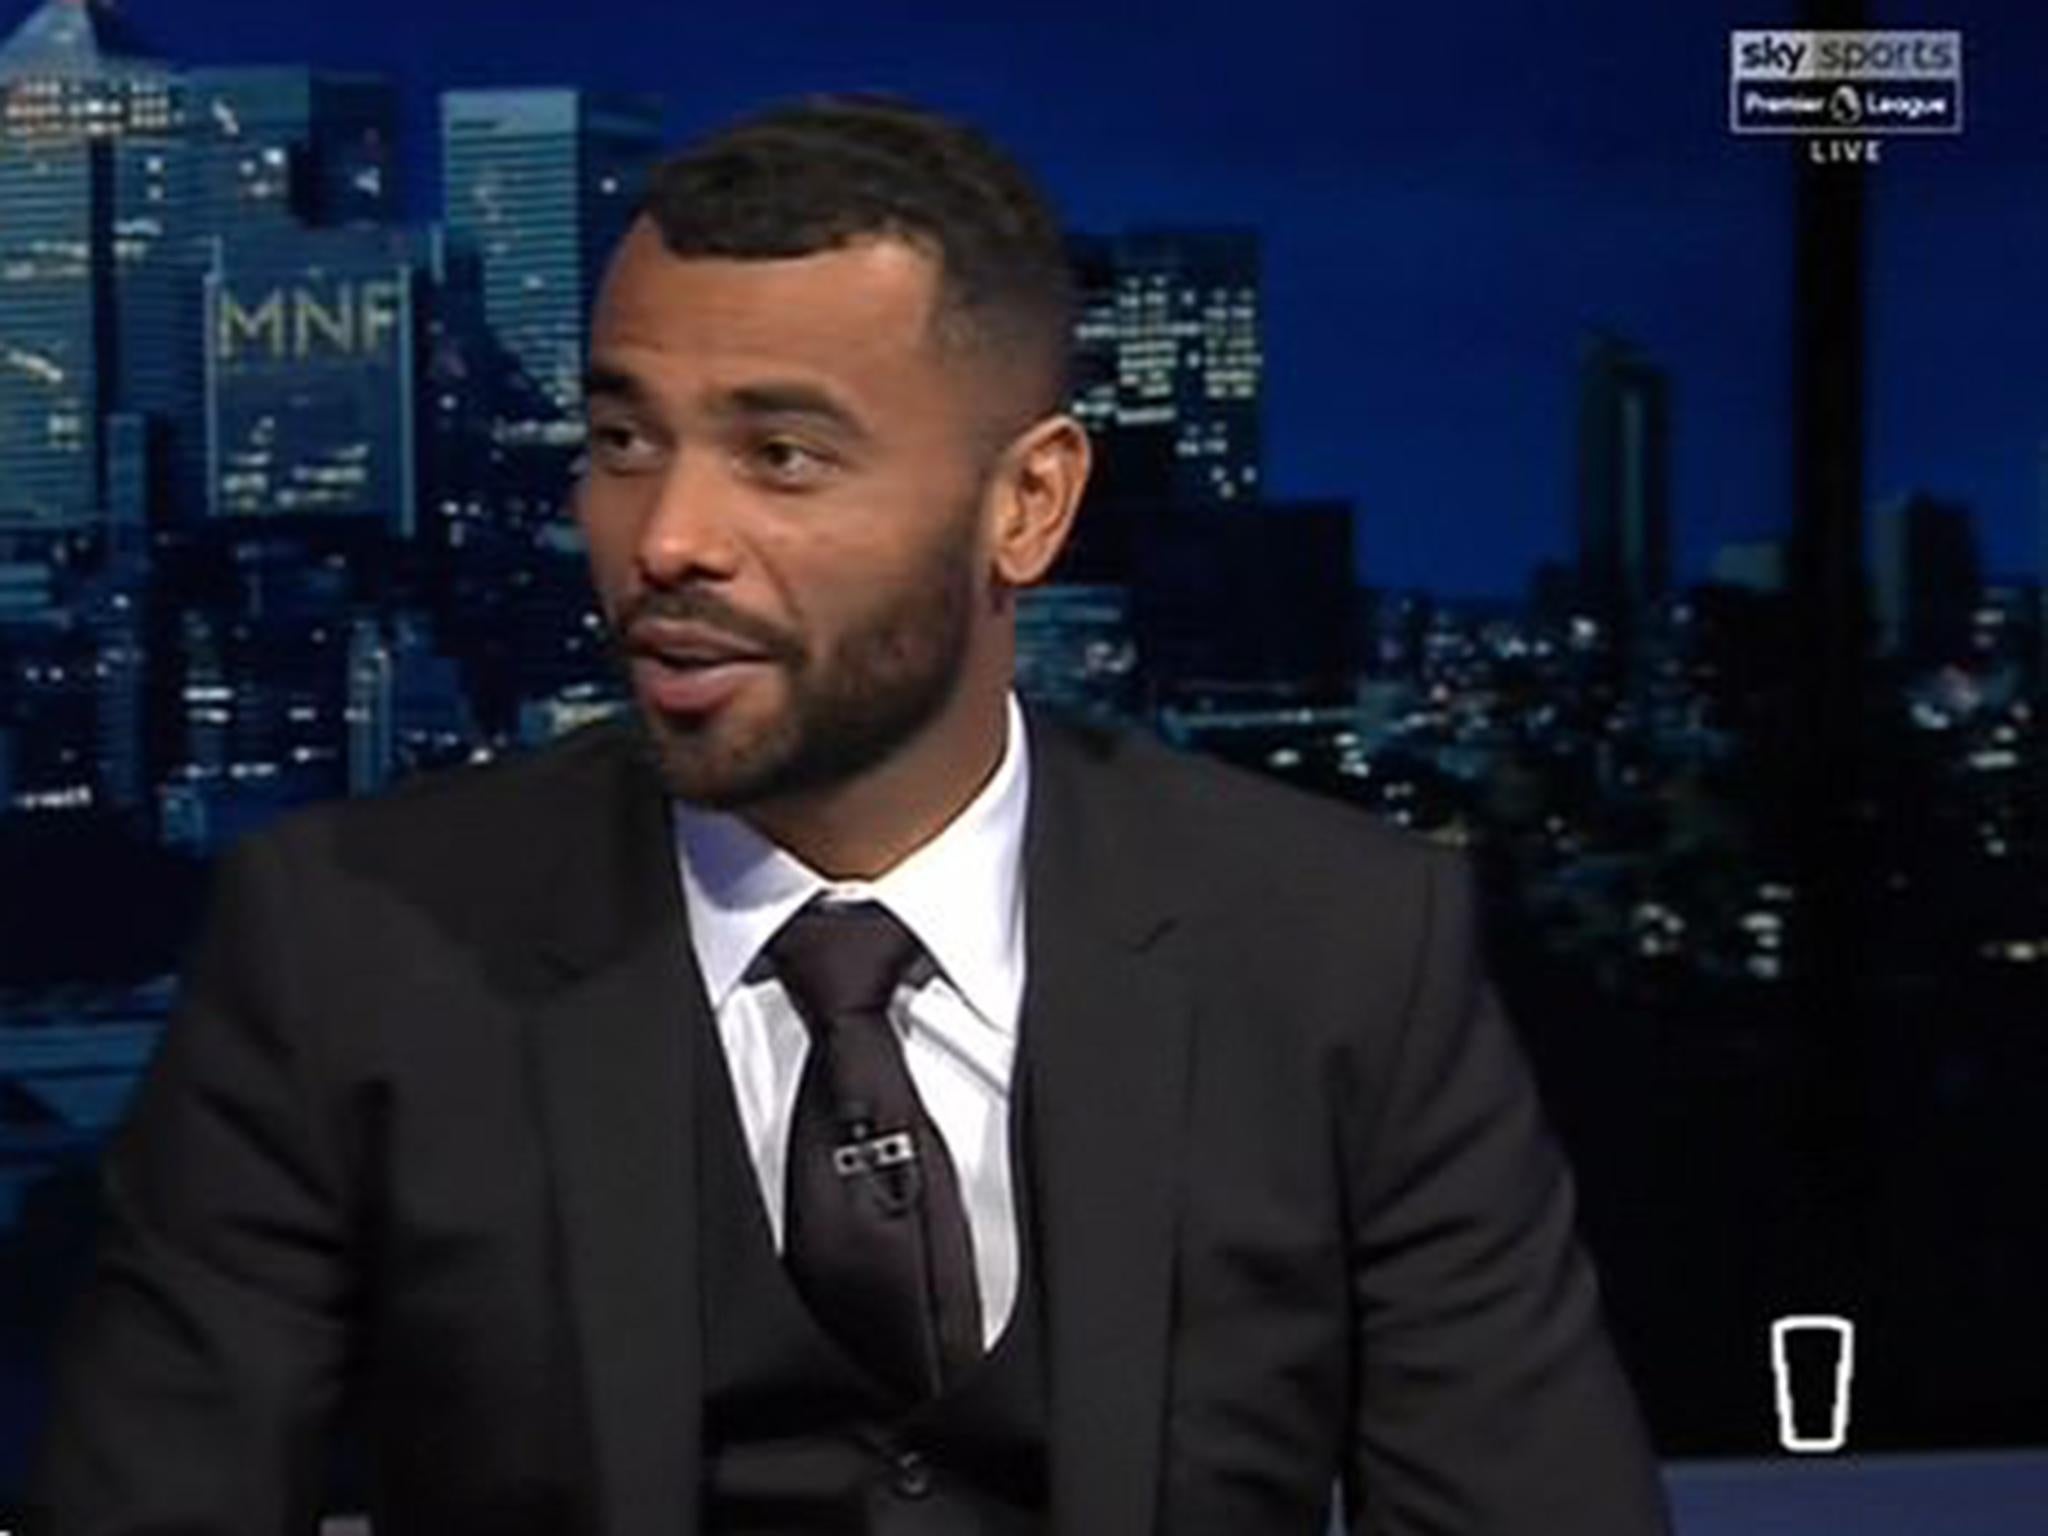 Ashley Cole said he remains 'hurt' by Arsenal fans' hate for him after leaving for Chelsea